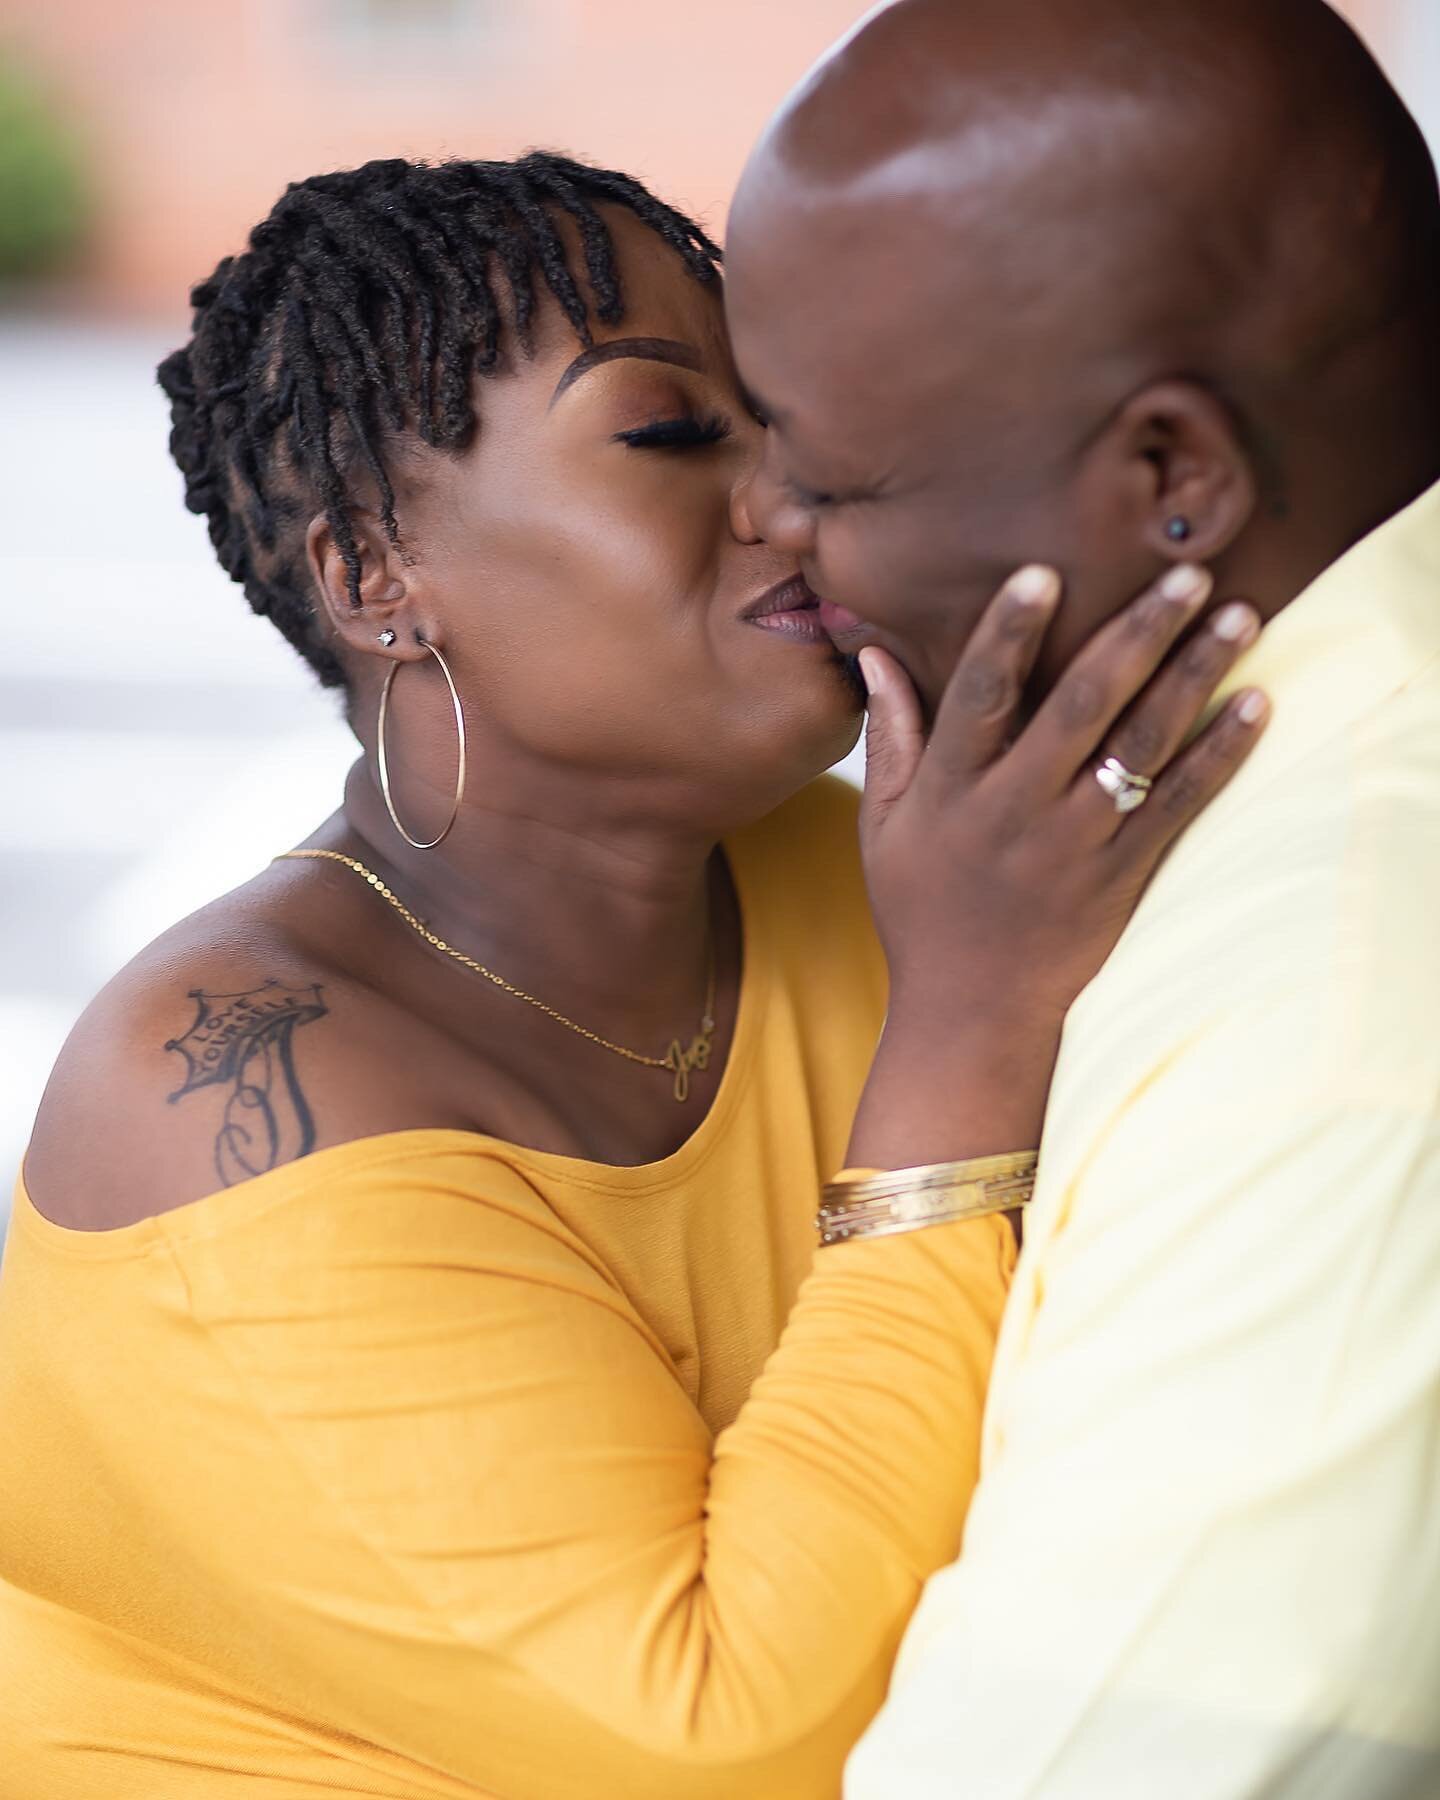 &ldquo;The most wonderful this I decided to do was share my life and heart with you&rdquo; 

#mlphotography #love #blacklove #alabamaphotographer #couples #portraitphotography